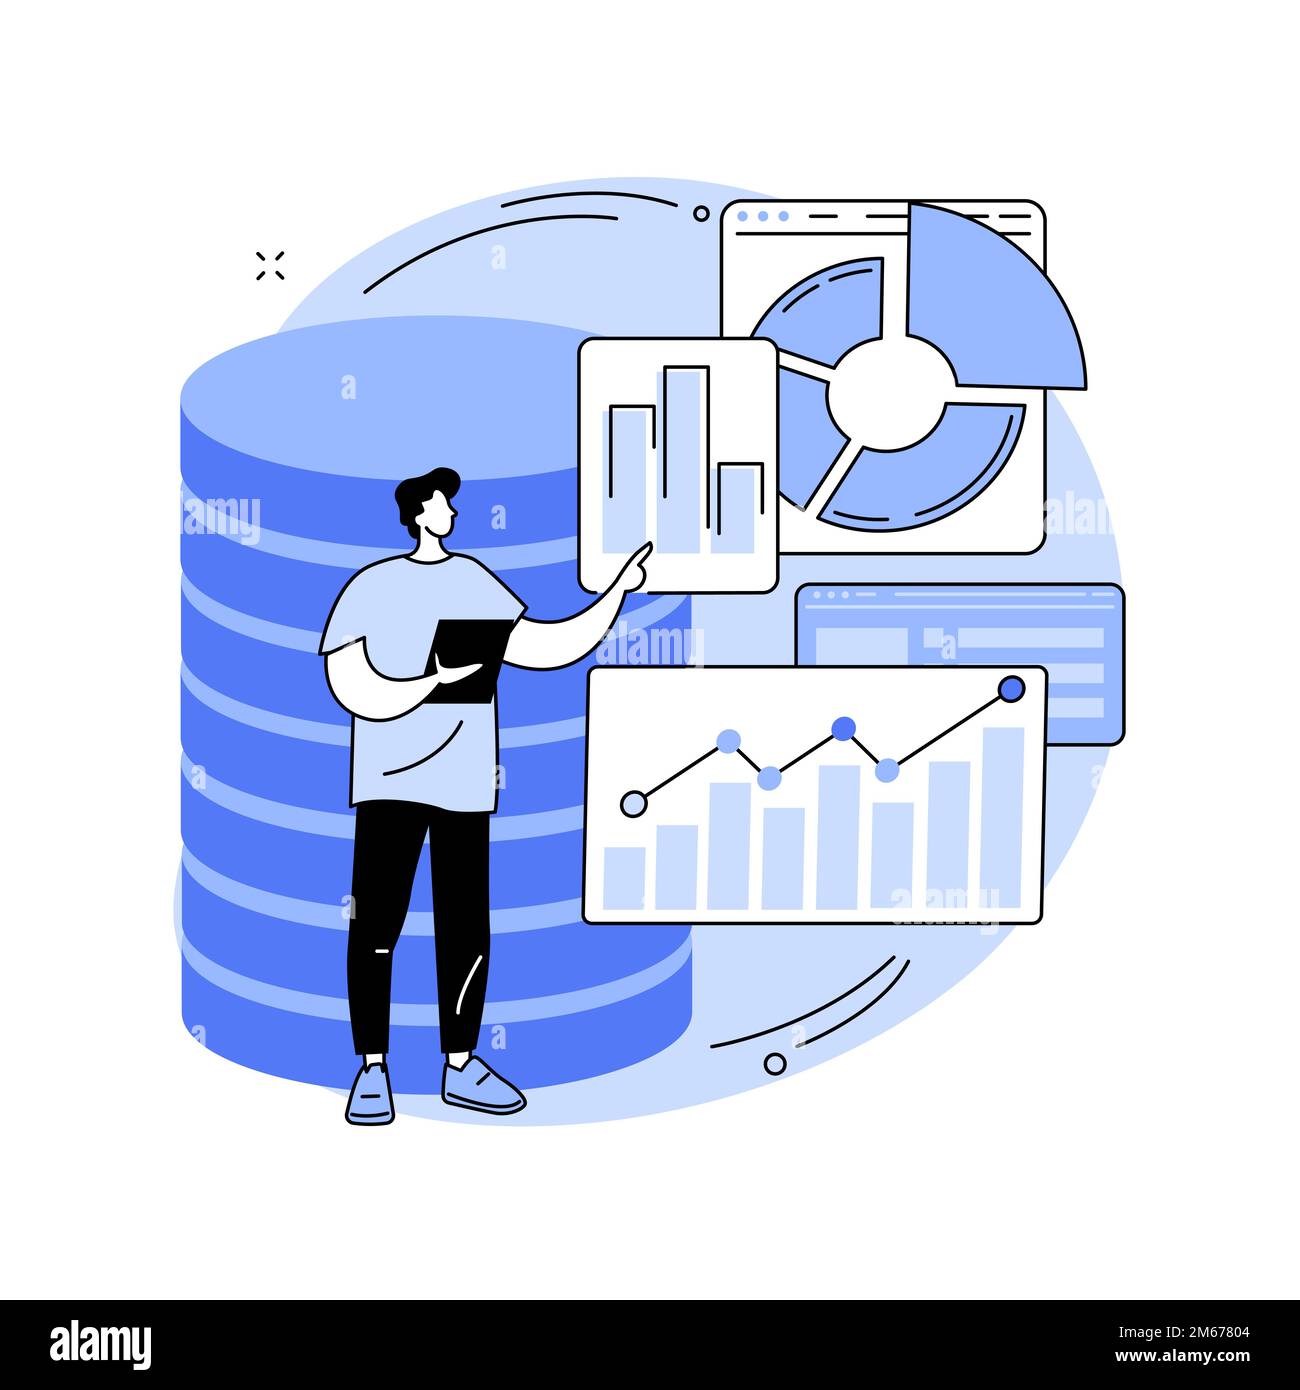 Analytics and data science abstract concept vector illustration. Big data, machine learning control, computer science, predictive analytics, perform s Stock Vector